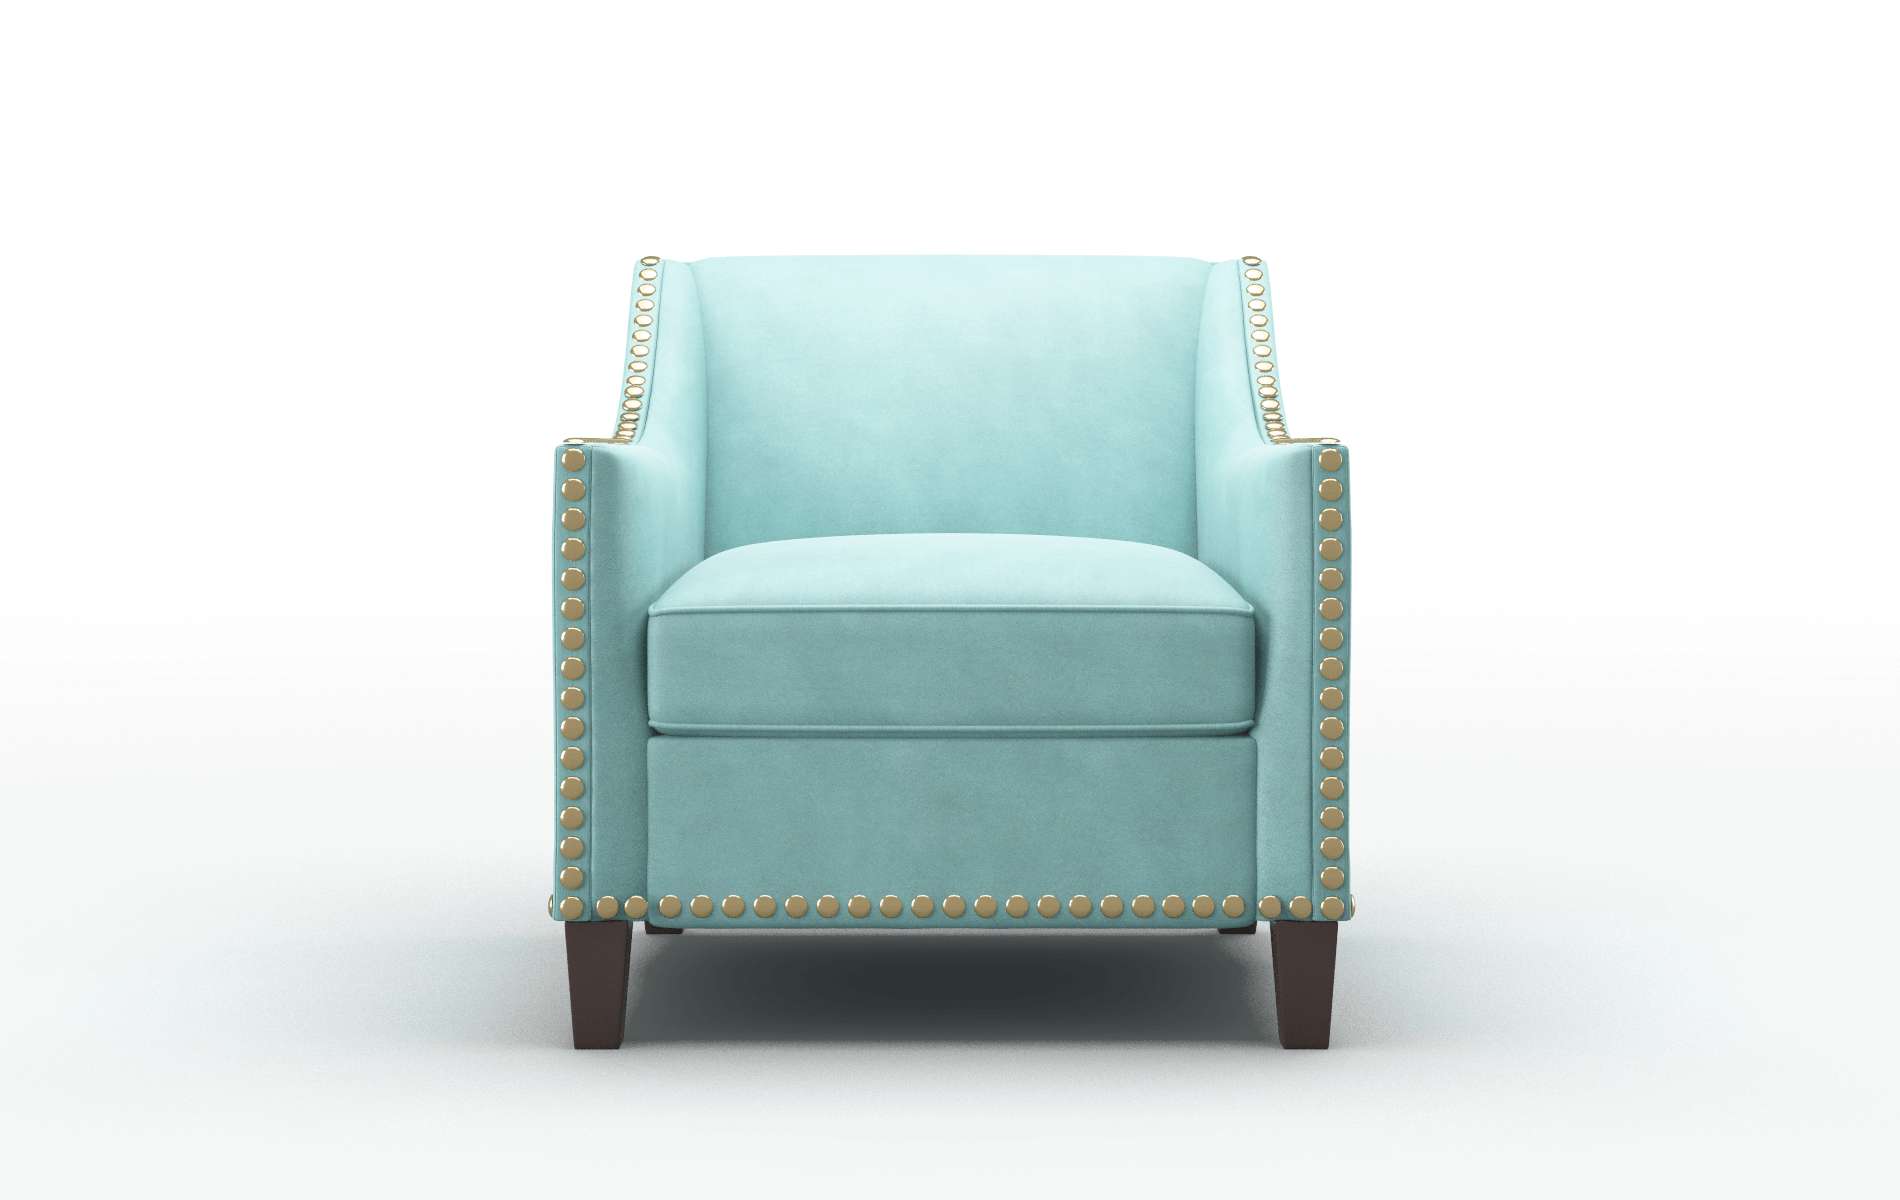 Amsterdam Curious Turquoise Chair espresso legs 1